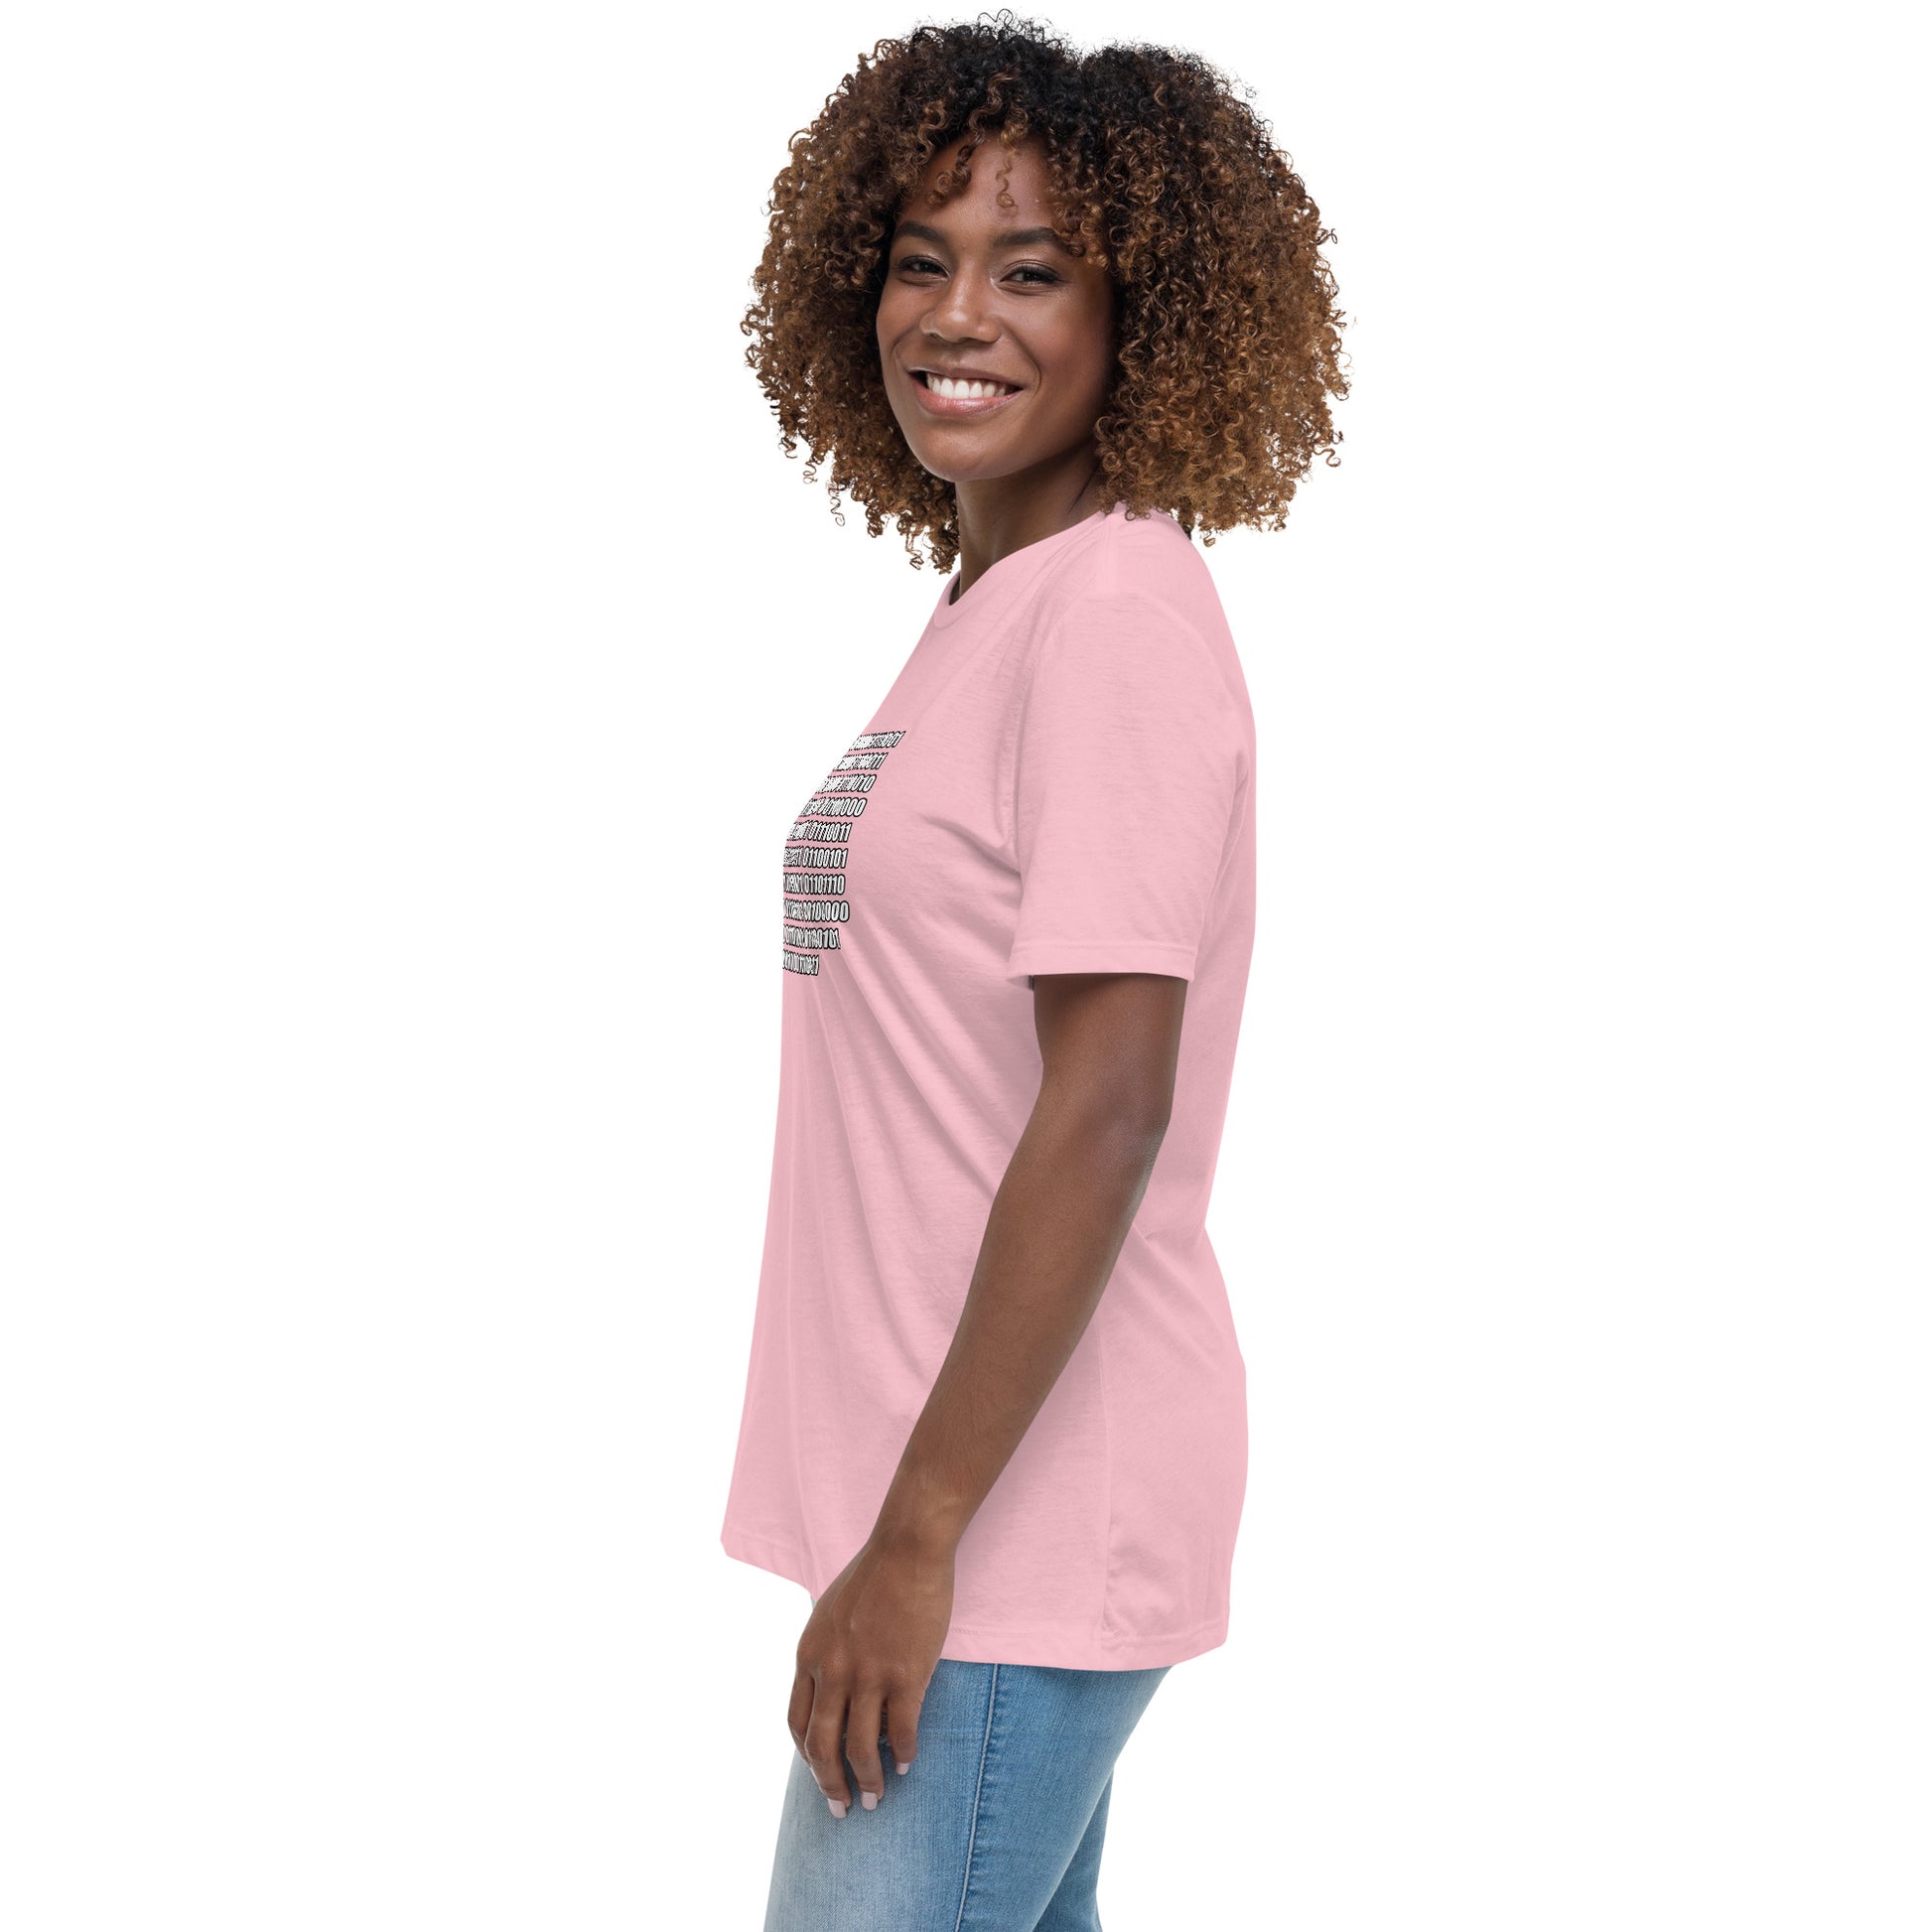 Woman with pink t-shirt with binary code "If you can read this"